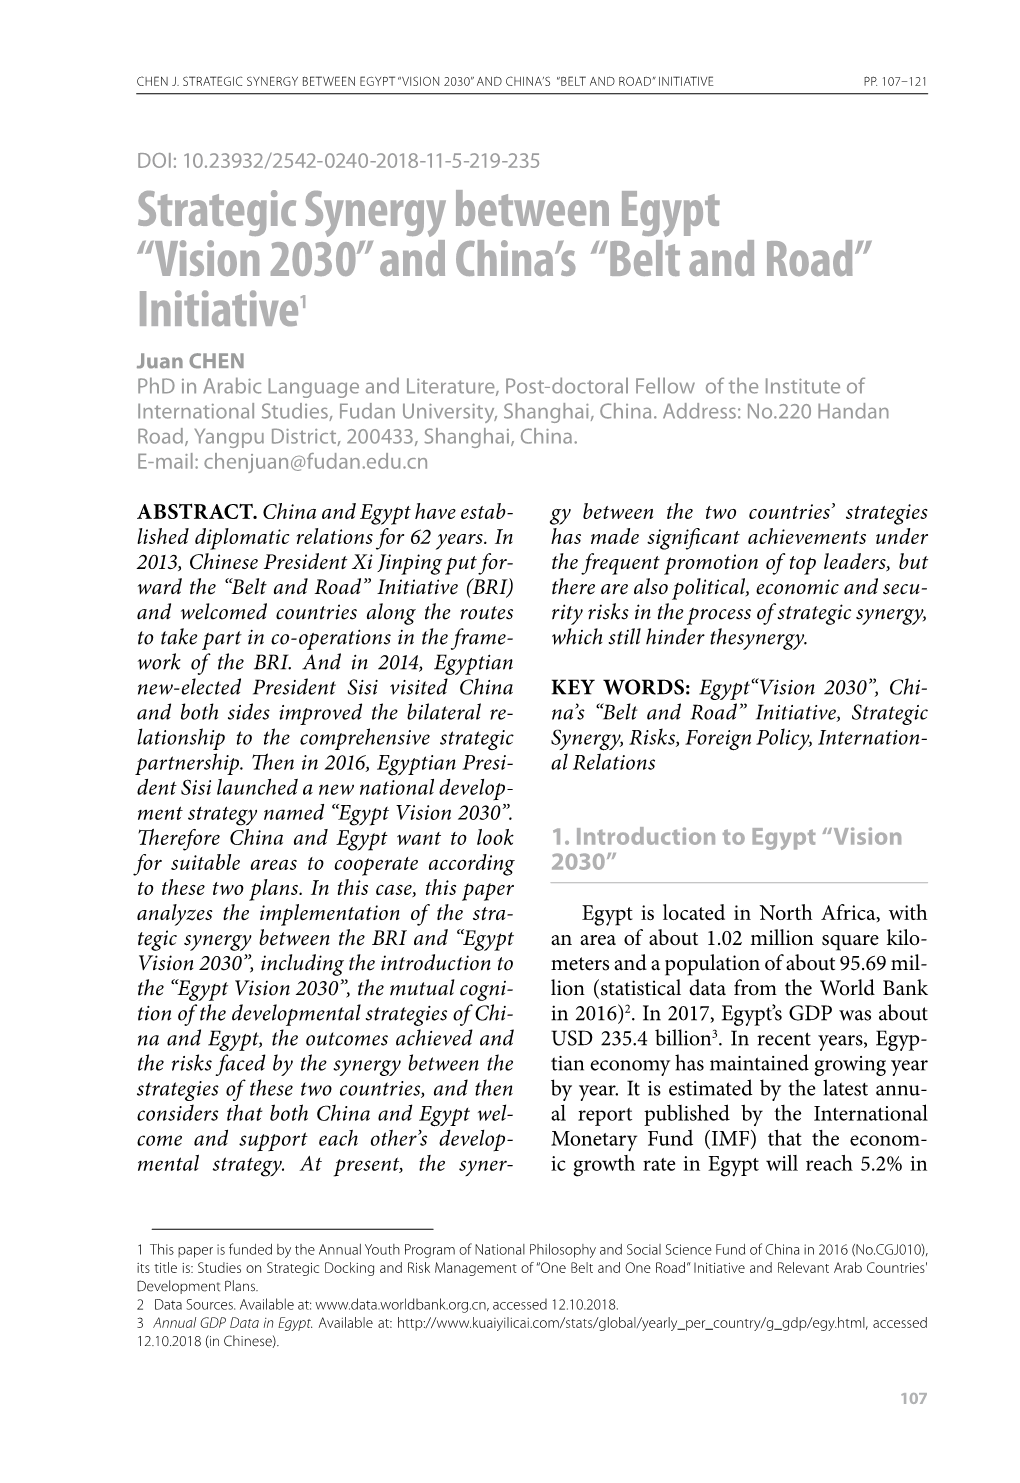 Strategic Synergy Between Egypt “Vision 2030” and China's “Belt And